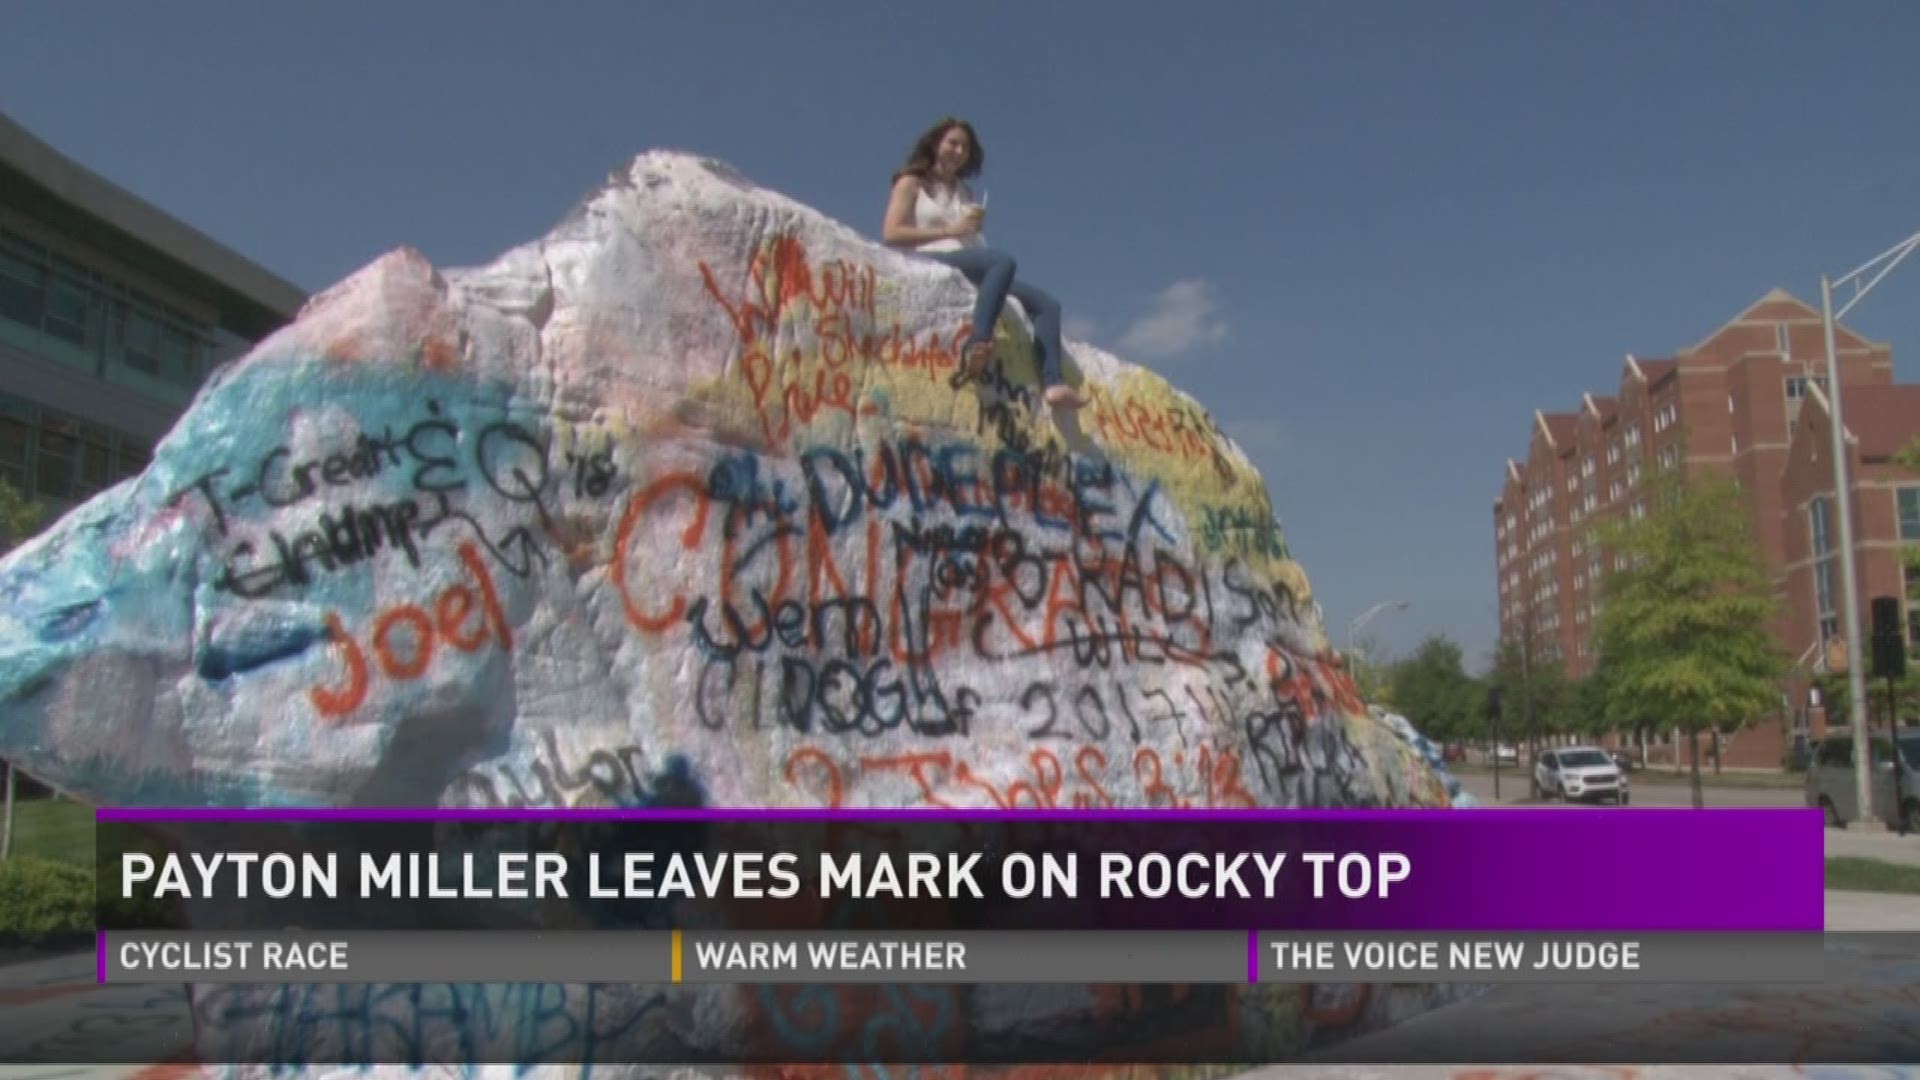 UT Senior Payton Miller is known for her paintings on "The Rock,"  but soon she will leave her legacy behind as she graduates Saturday.